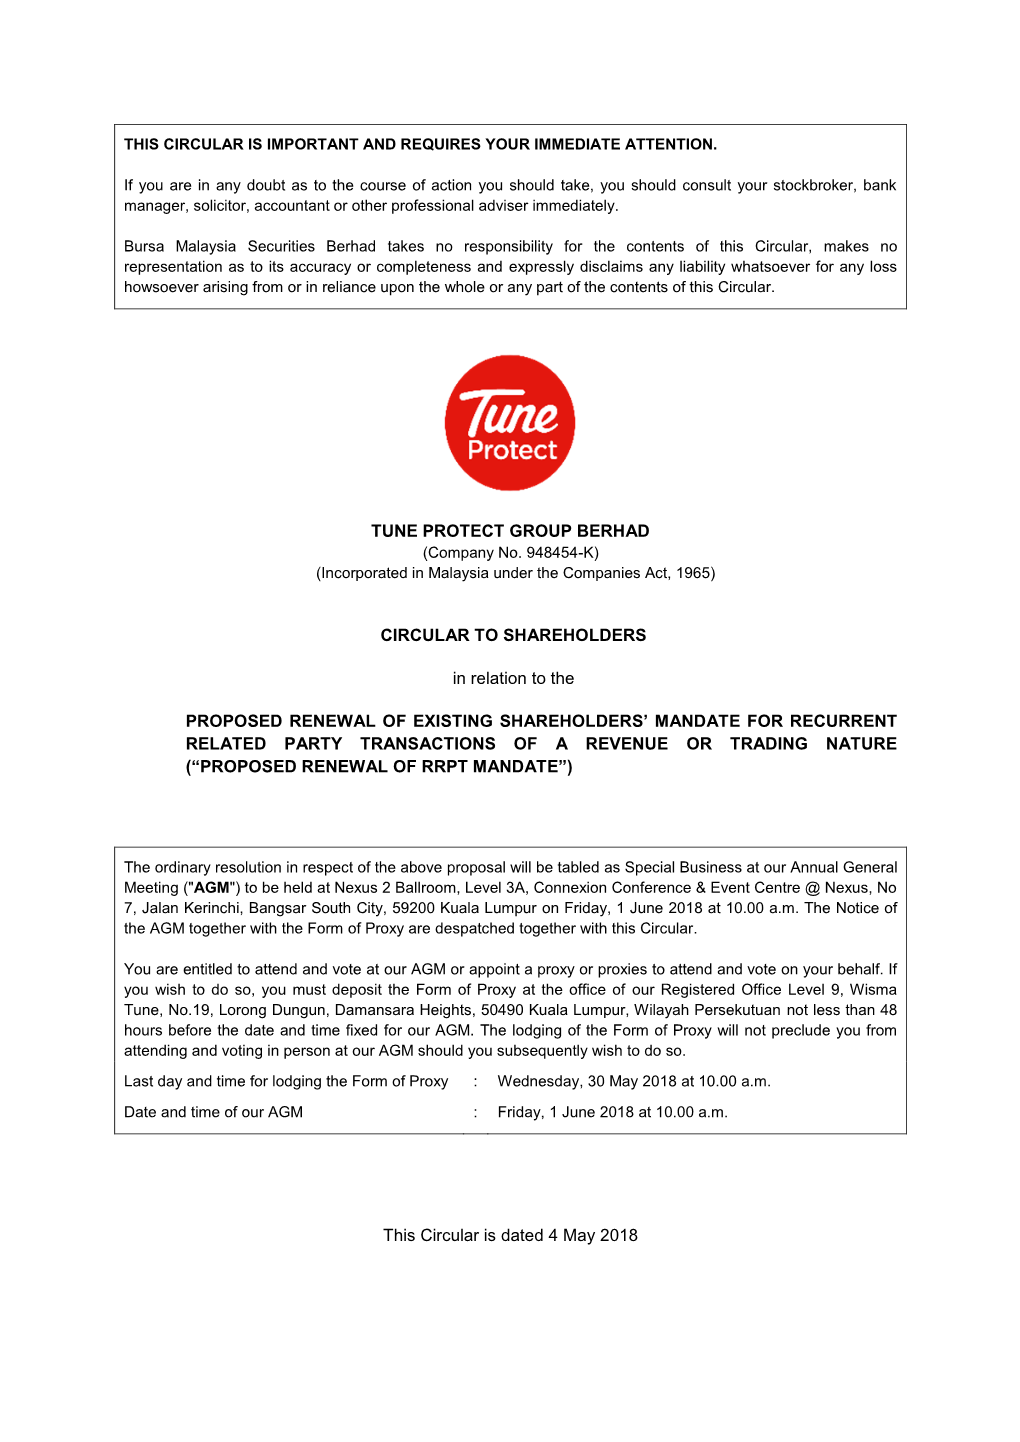 TUNE PROTECT GROUP BERHAD CIRCULAR to SHAREHOLDERS in Relation to the PROPOSED RENEWAL of EXISTING SHAREHOLDERS' MANDATE